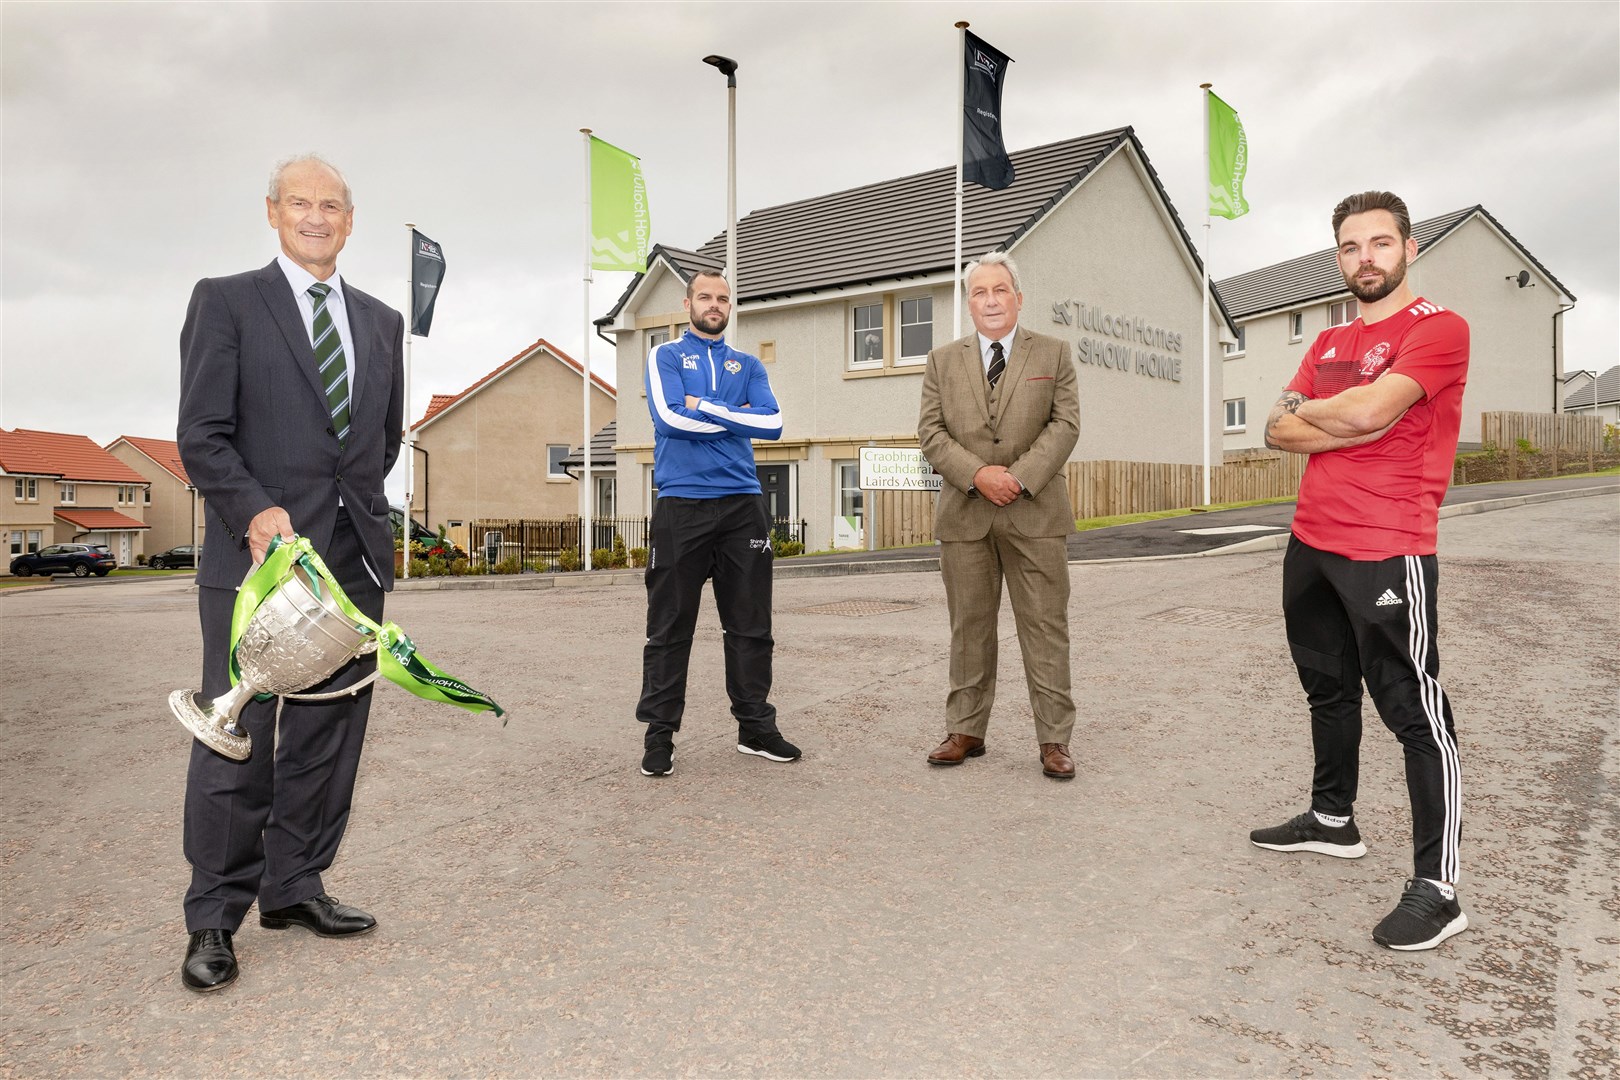 READY FOR THE BIG DAY: George Fraser of Tulloch Homes, Newtonmore captain Evan Menzies, Camanachd Association President Keith Loades and Oban Camanachd captain Daniel Cameron.